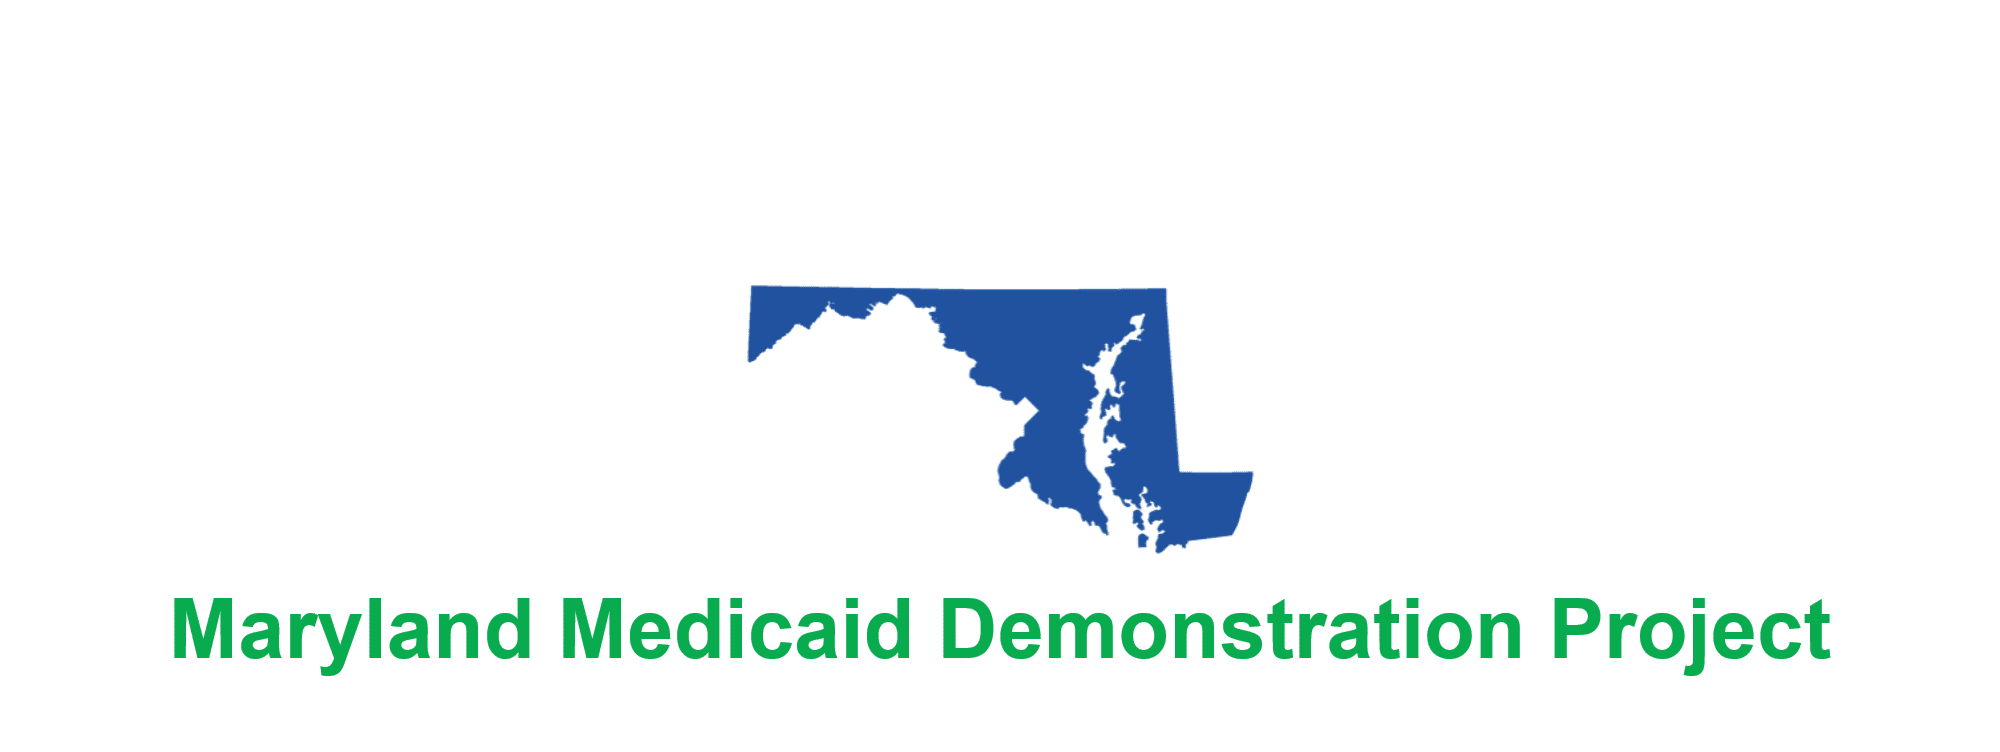 Maryland Medicaid Demonstration Project